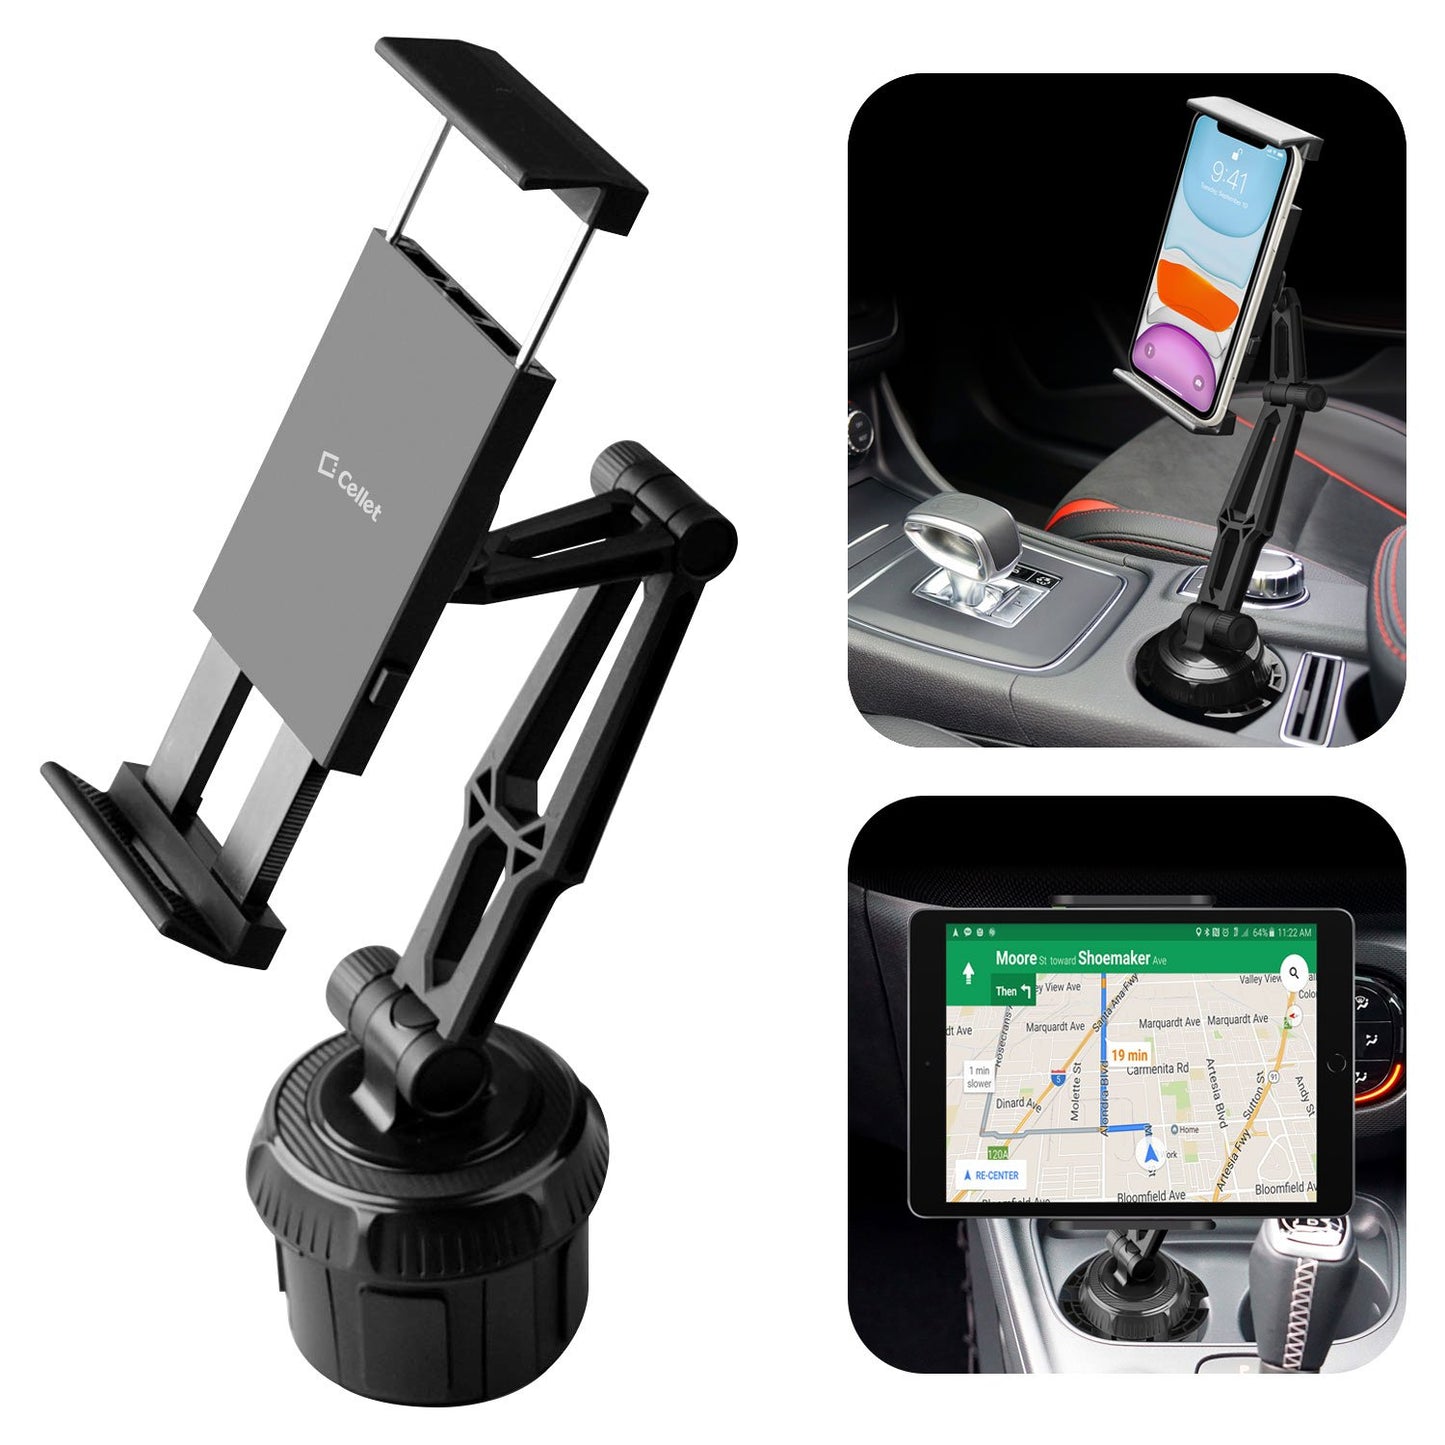 PH620 -  Cellet Tablet/Smartphone Cup Holder Mount, Cup Holder Mount with Adjustable Base Compatible to iPhone iPads, Tablets, Smartphones, GPS